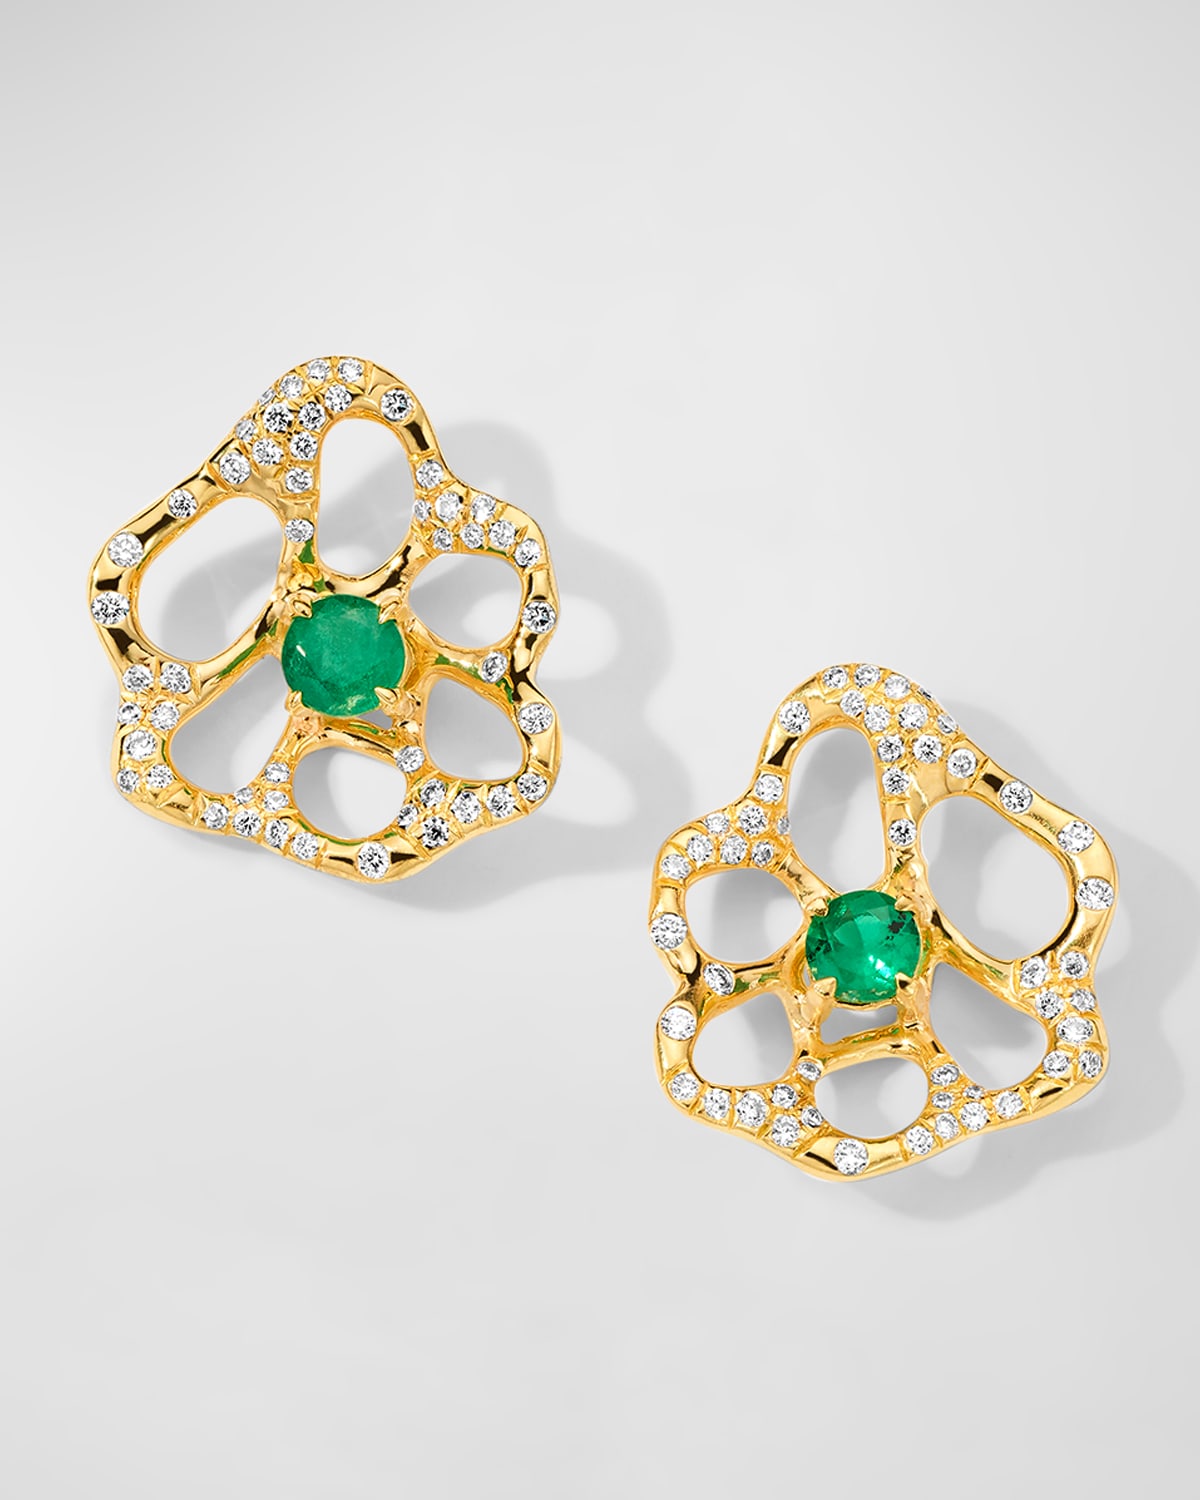 IPPOLITA 18K STARDUST DRIZZLE SMALL FLOWER STUD EARRINGS WITH GREEN EMERALD AND DIAMONDS